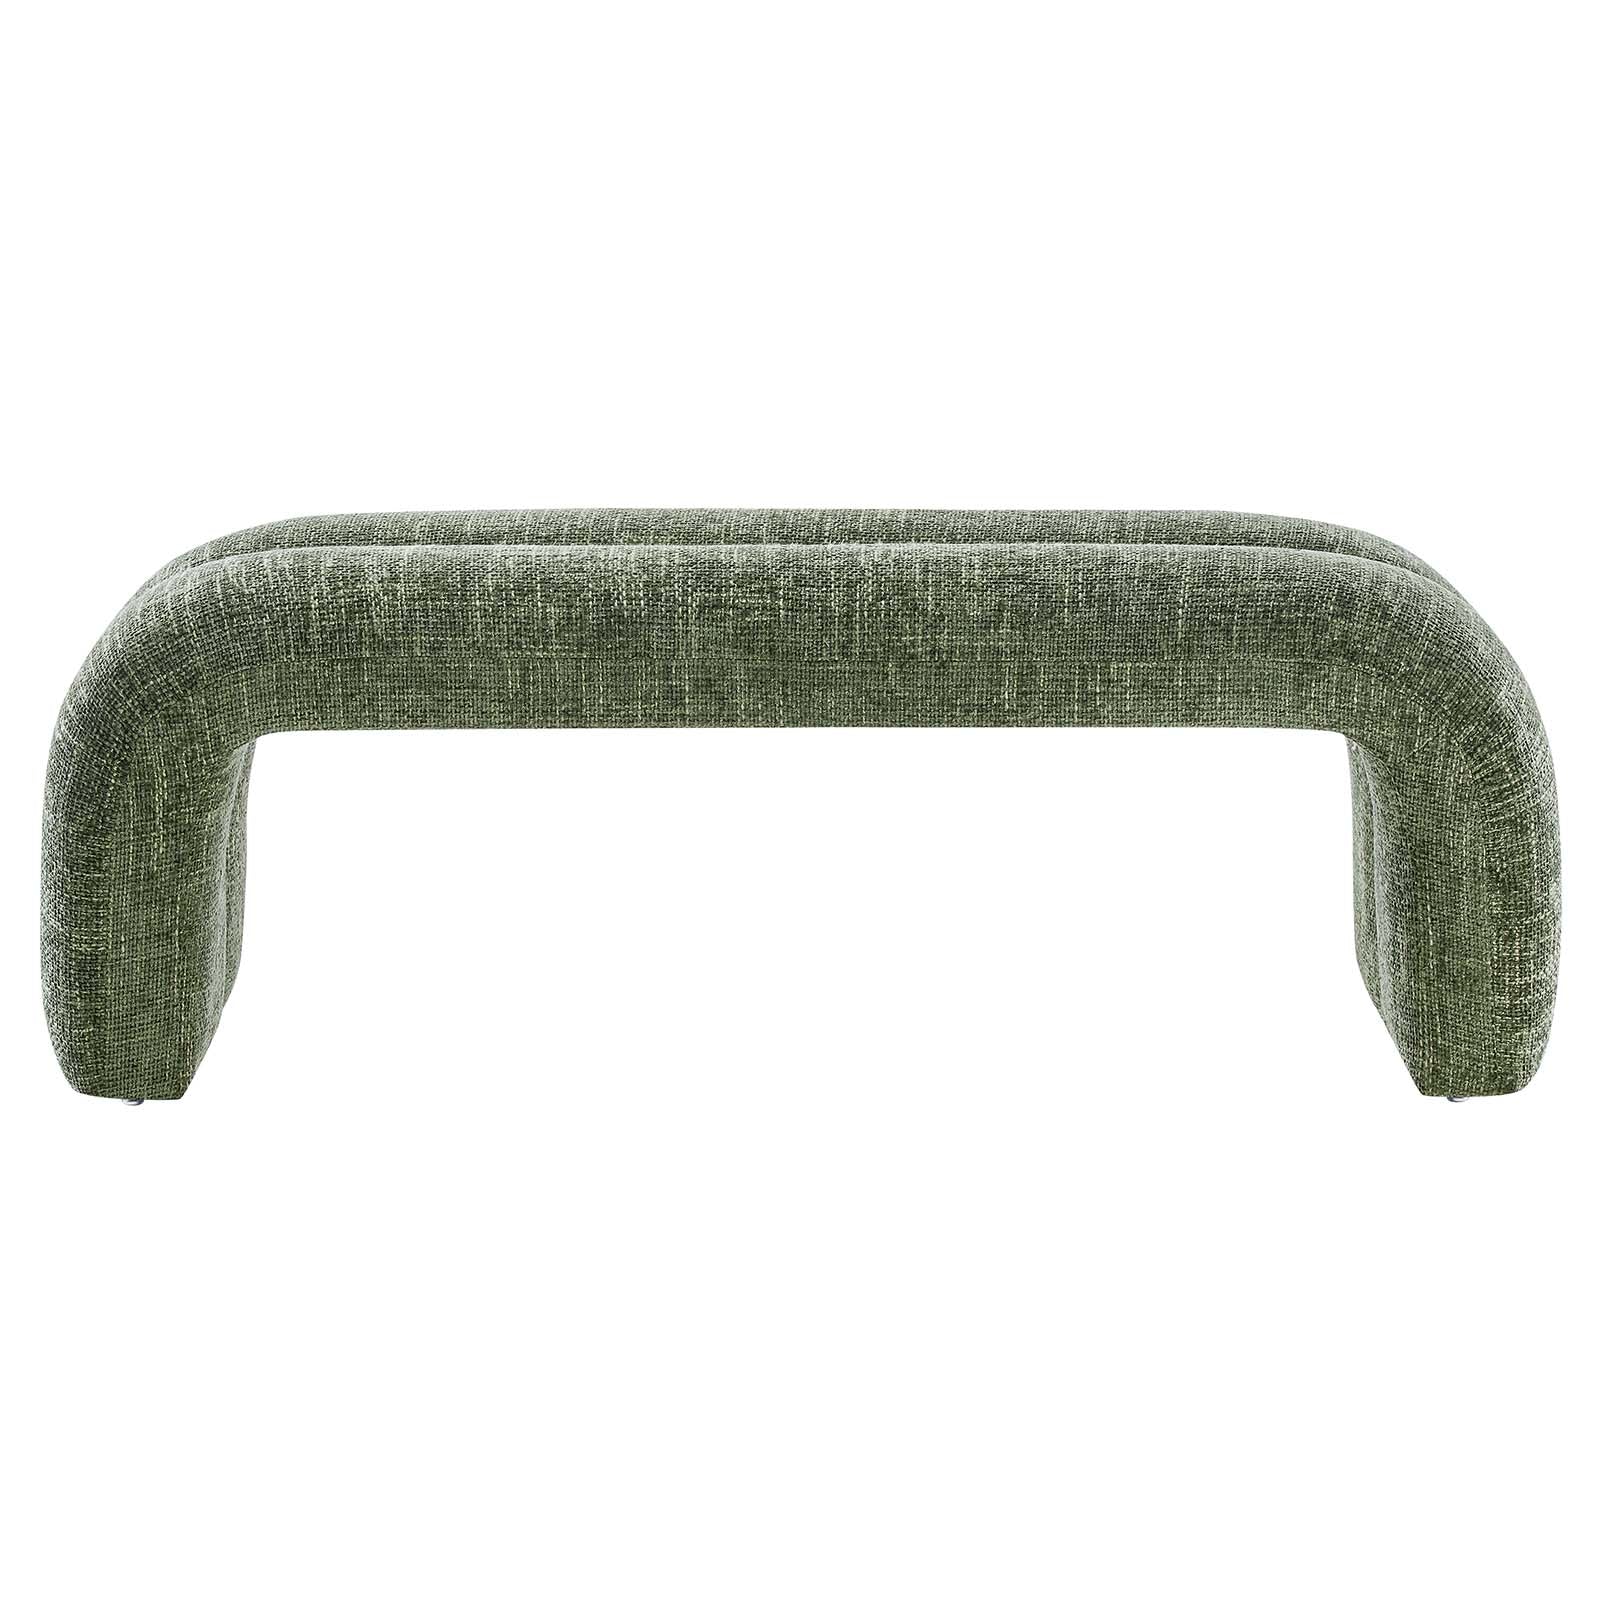 Dax 50.5" Chenille Upholstered Accent Bench - Elite Maison